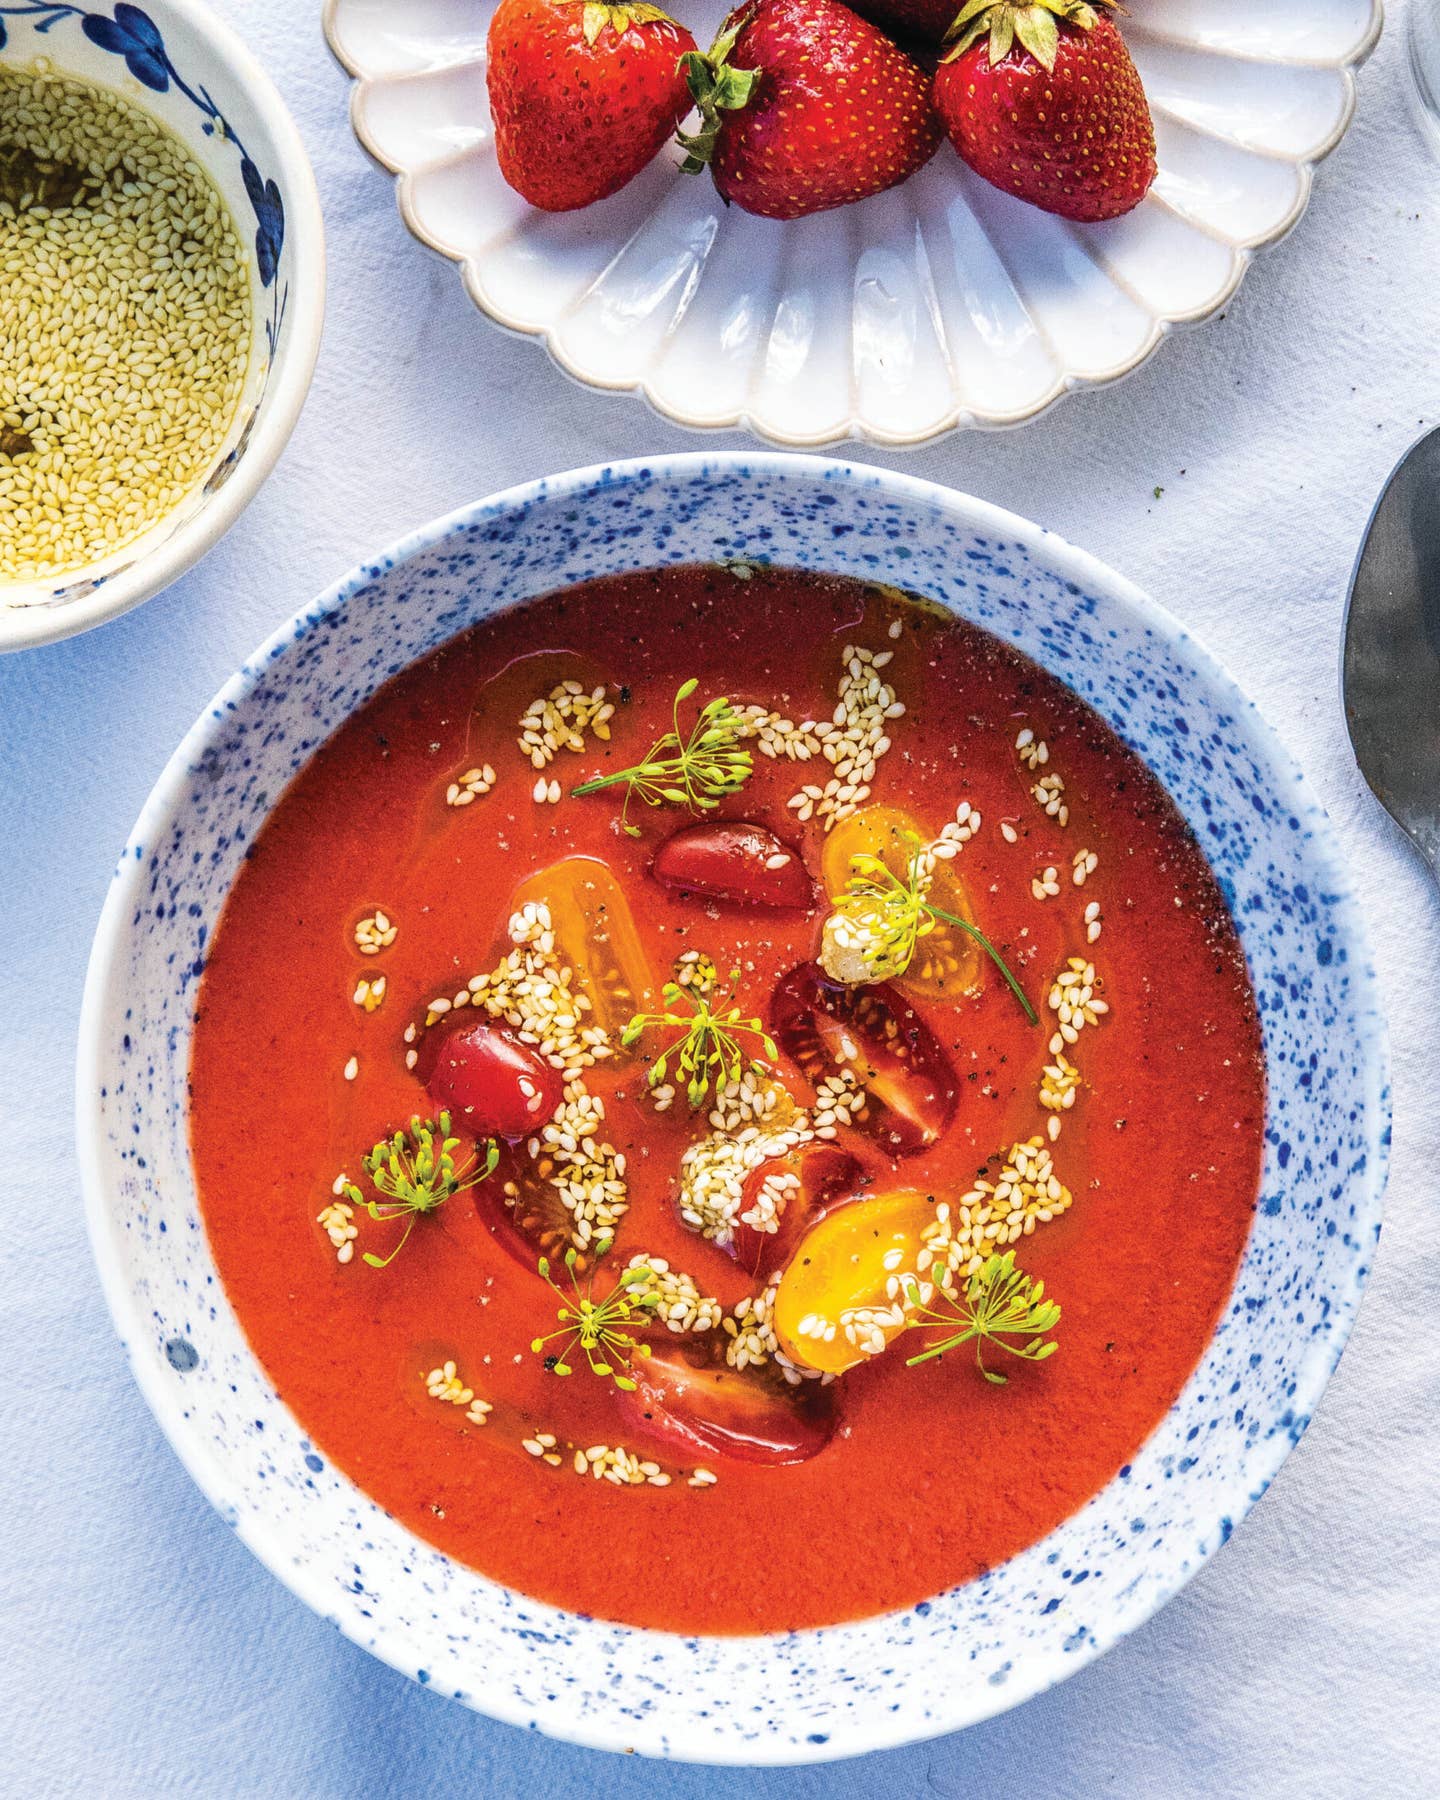 Chilled Tomato-Strawberry Soup